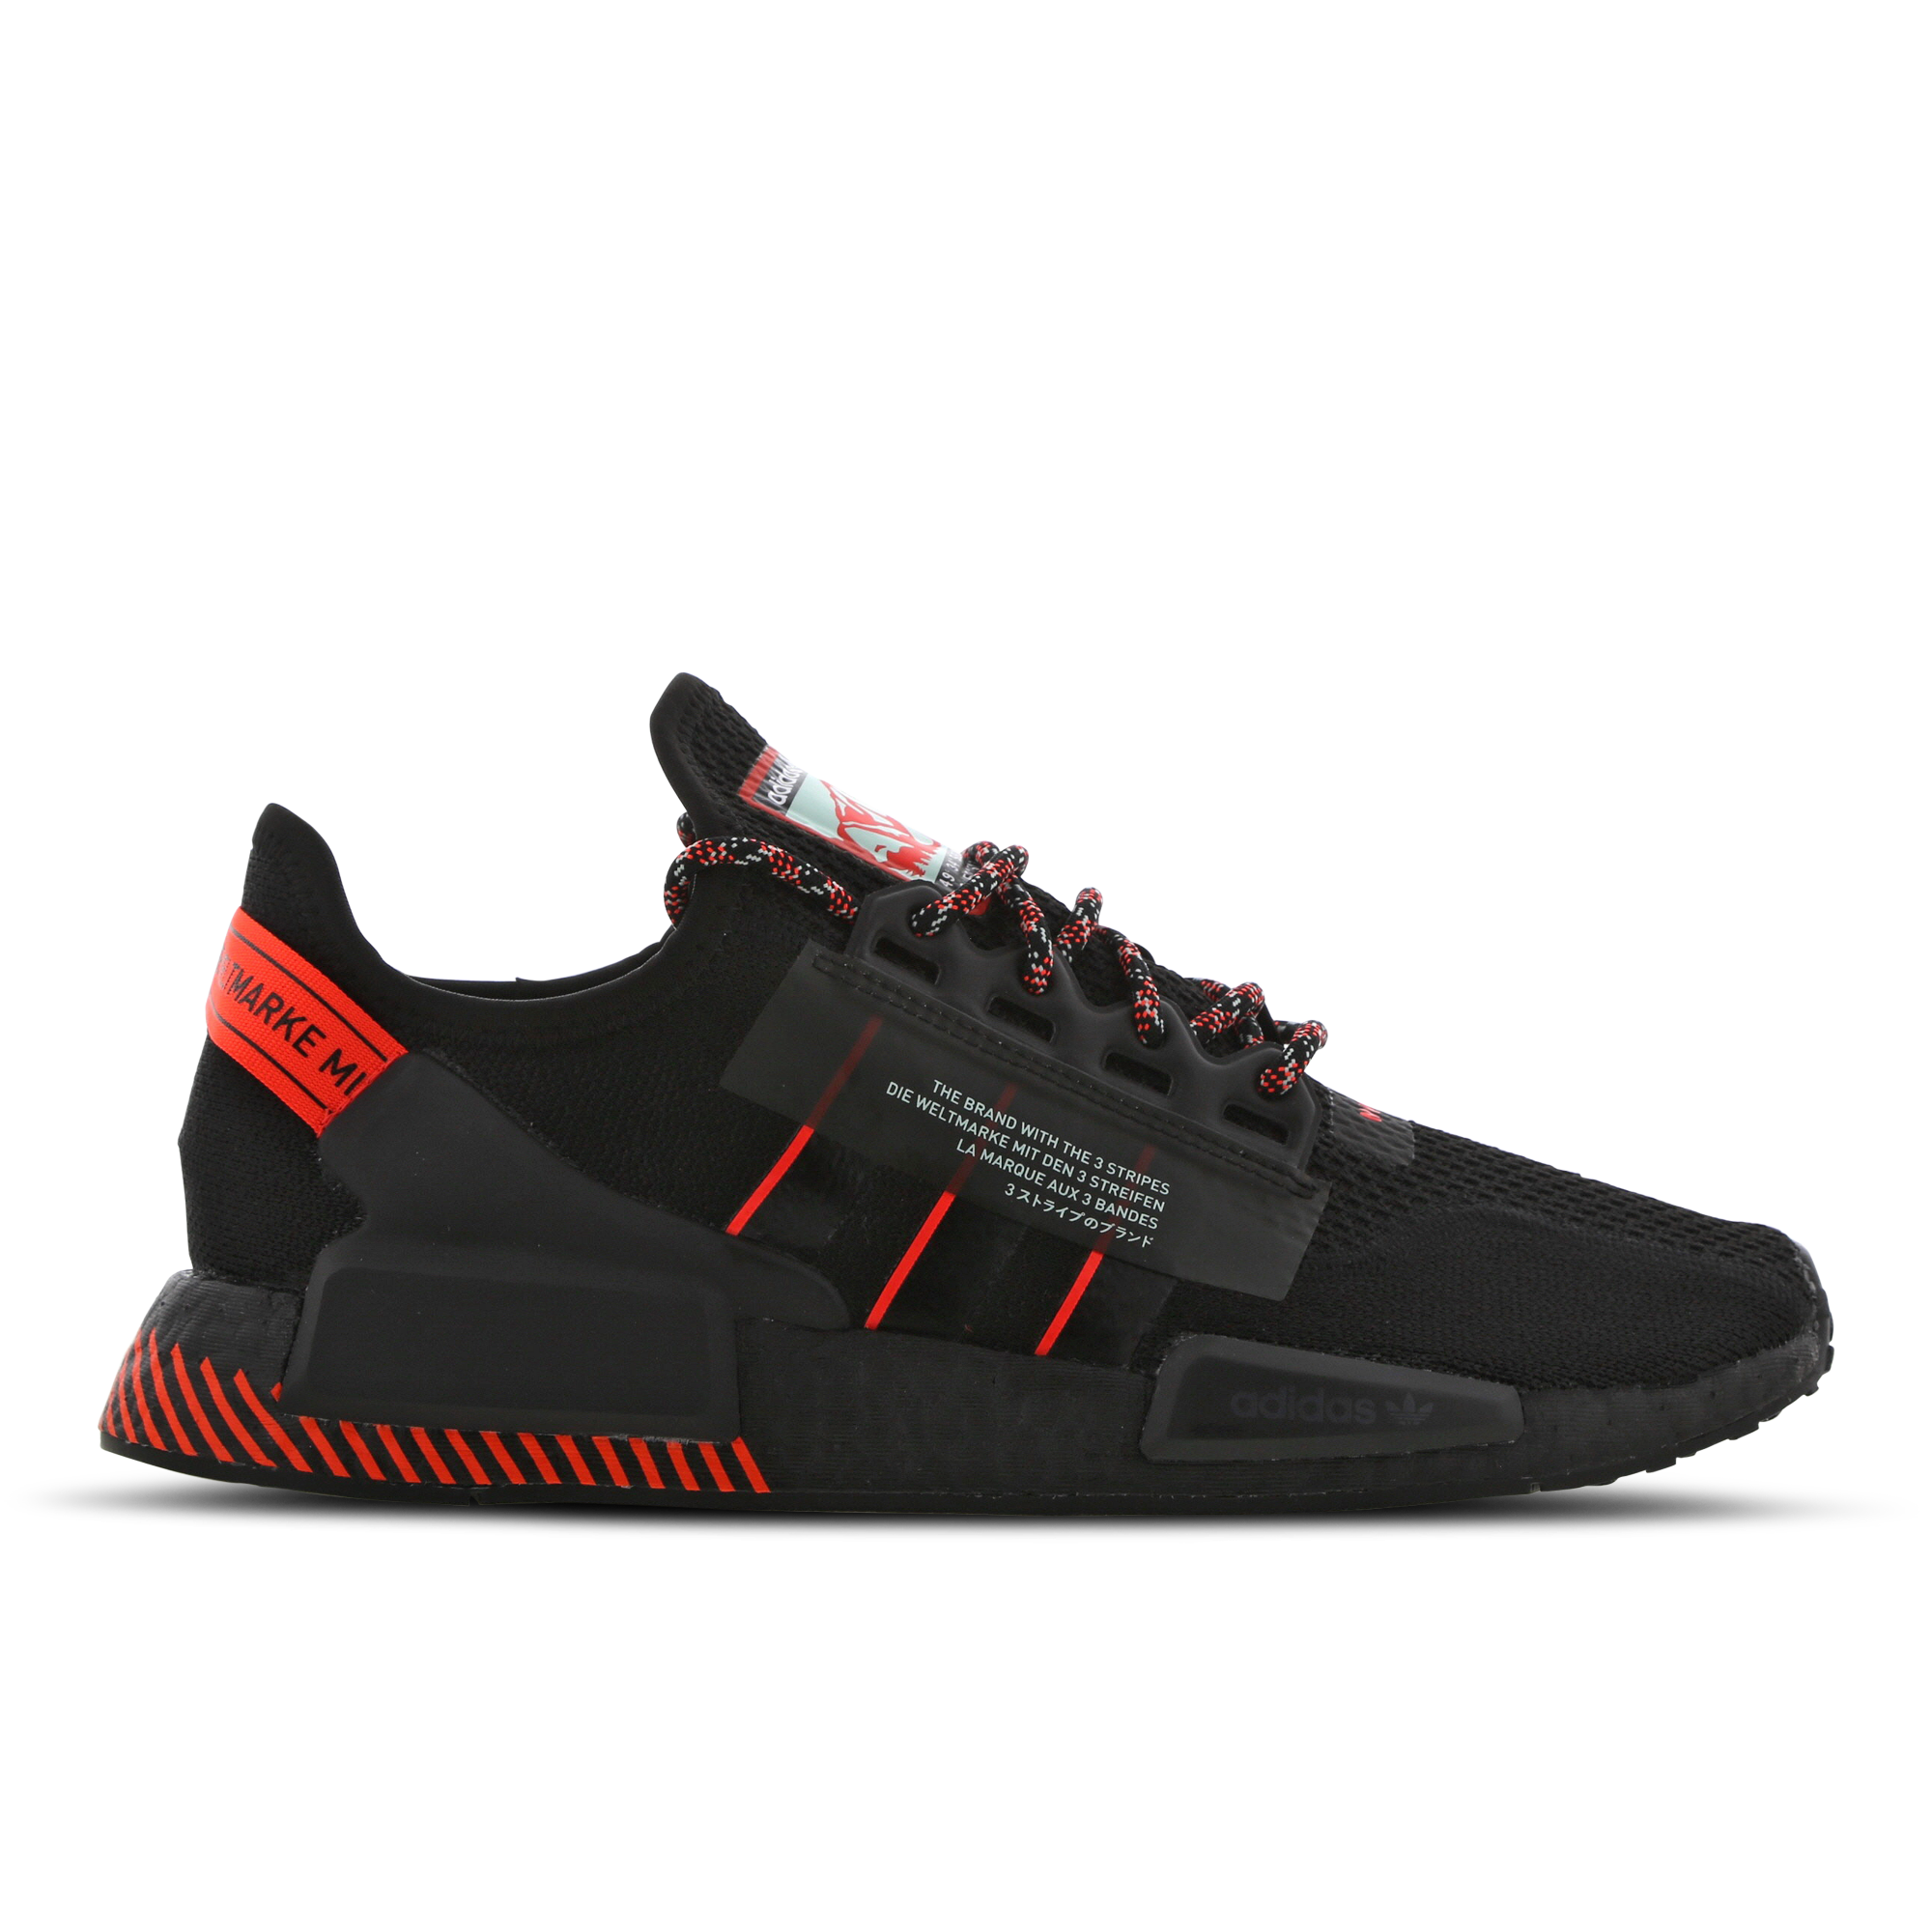 adidas NMD R1 OG Here s Where You Can Buy the Restock